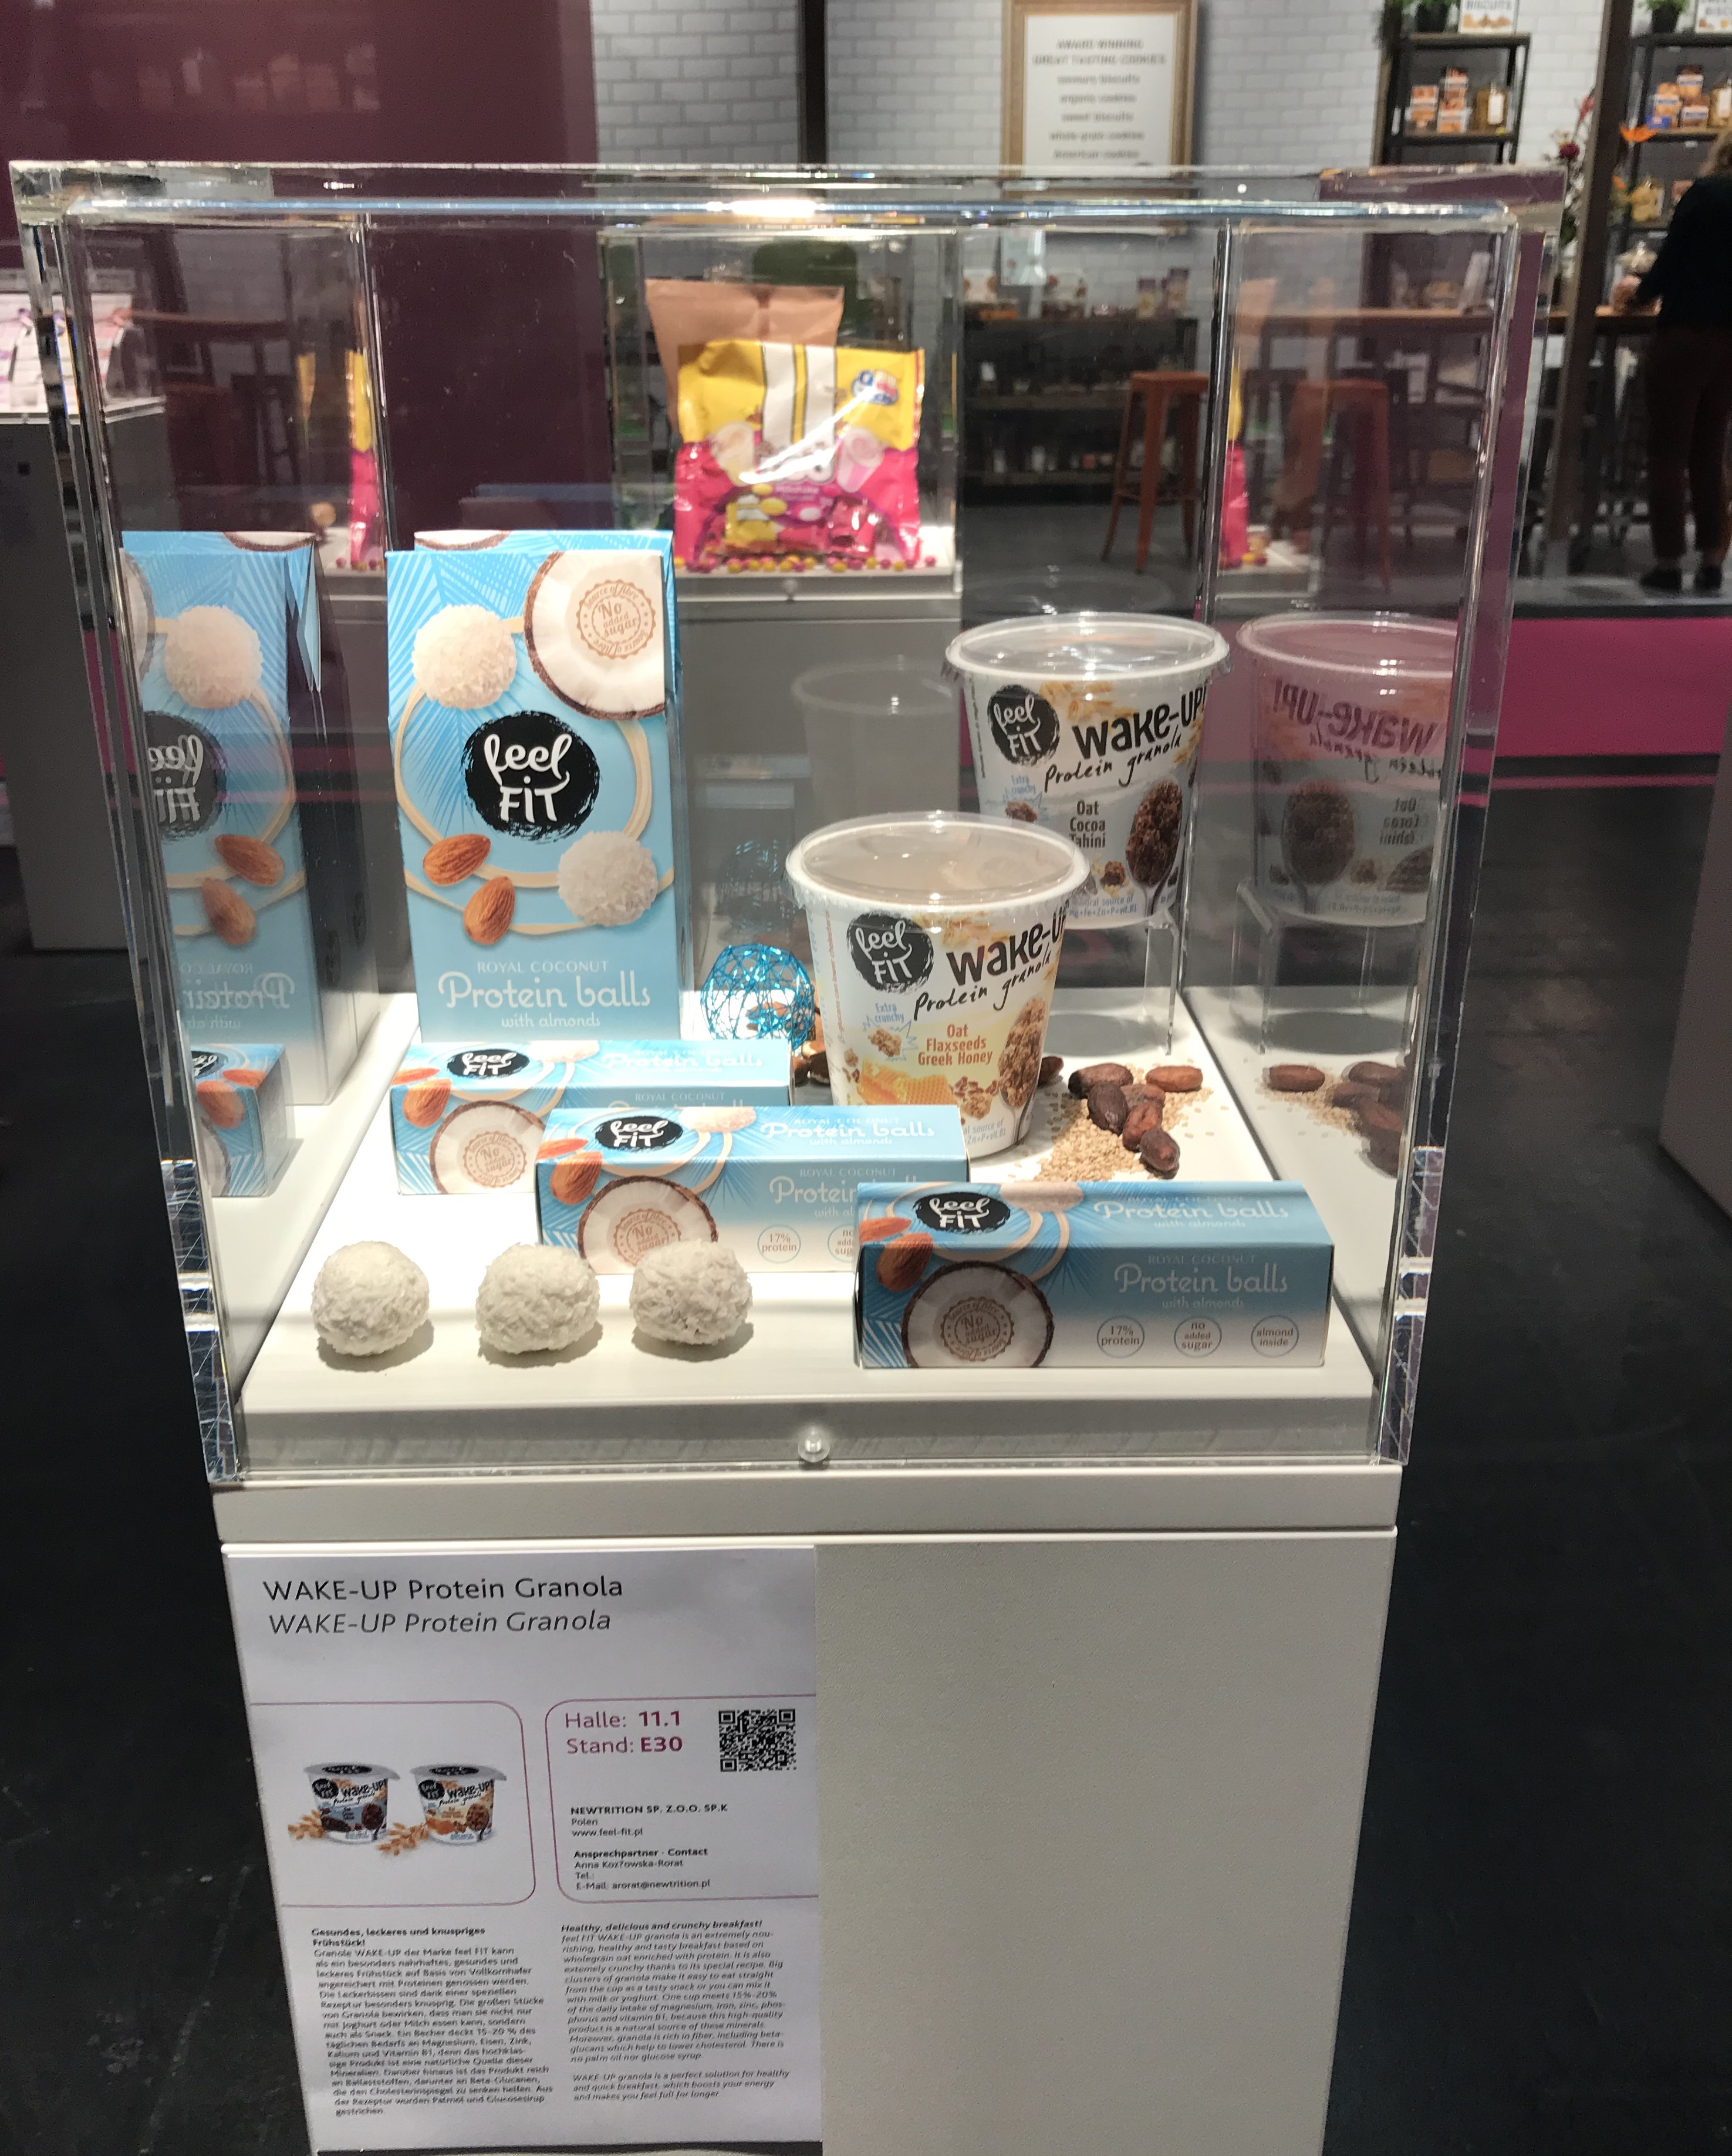 ISM 2019 New Product Showcase feel FIT Protein balls